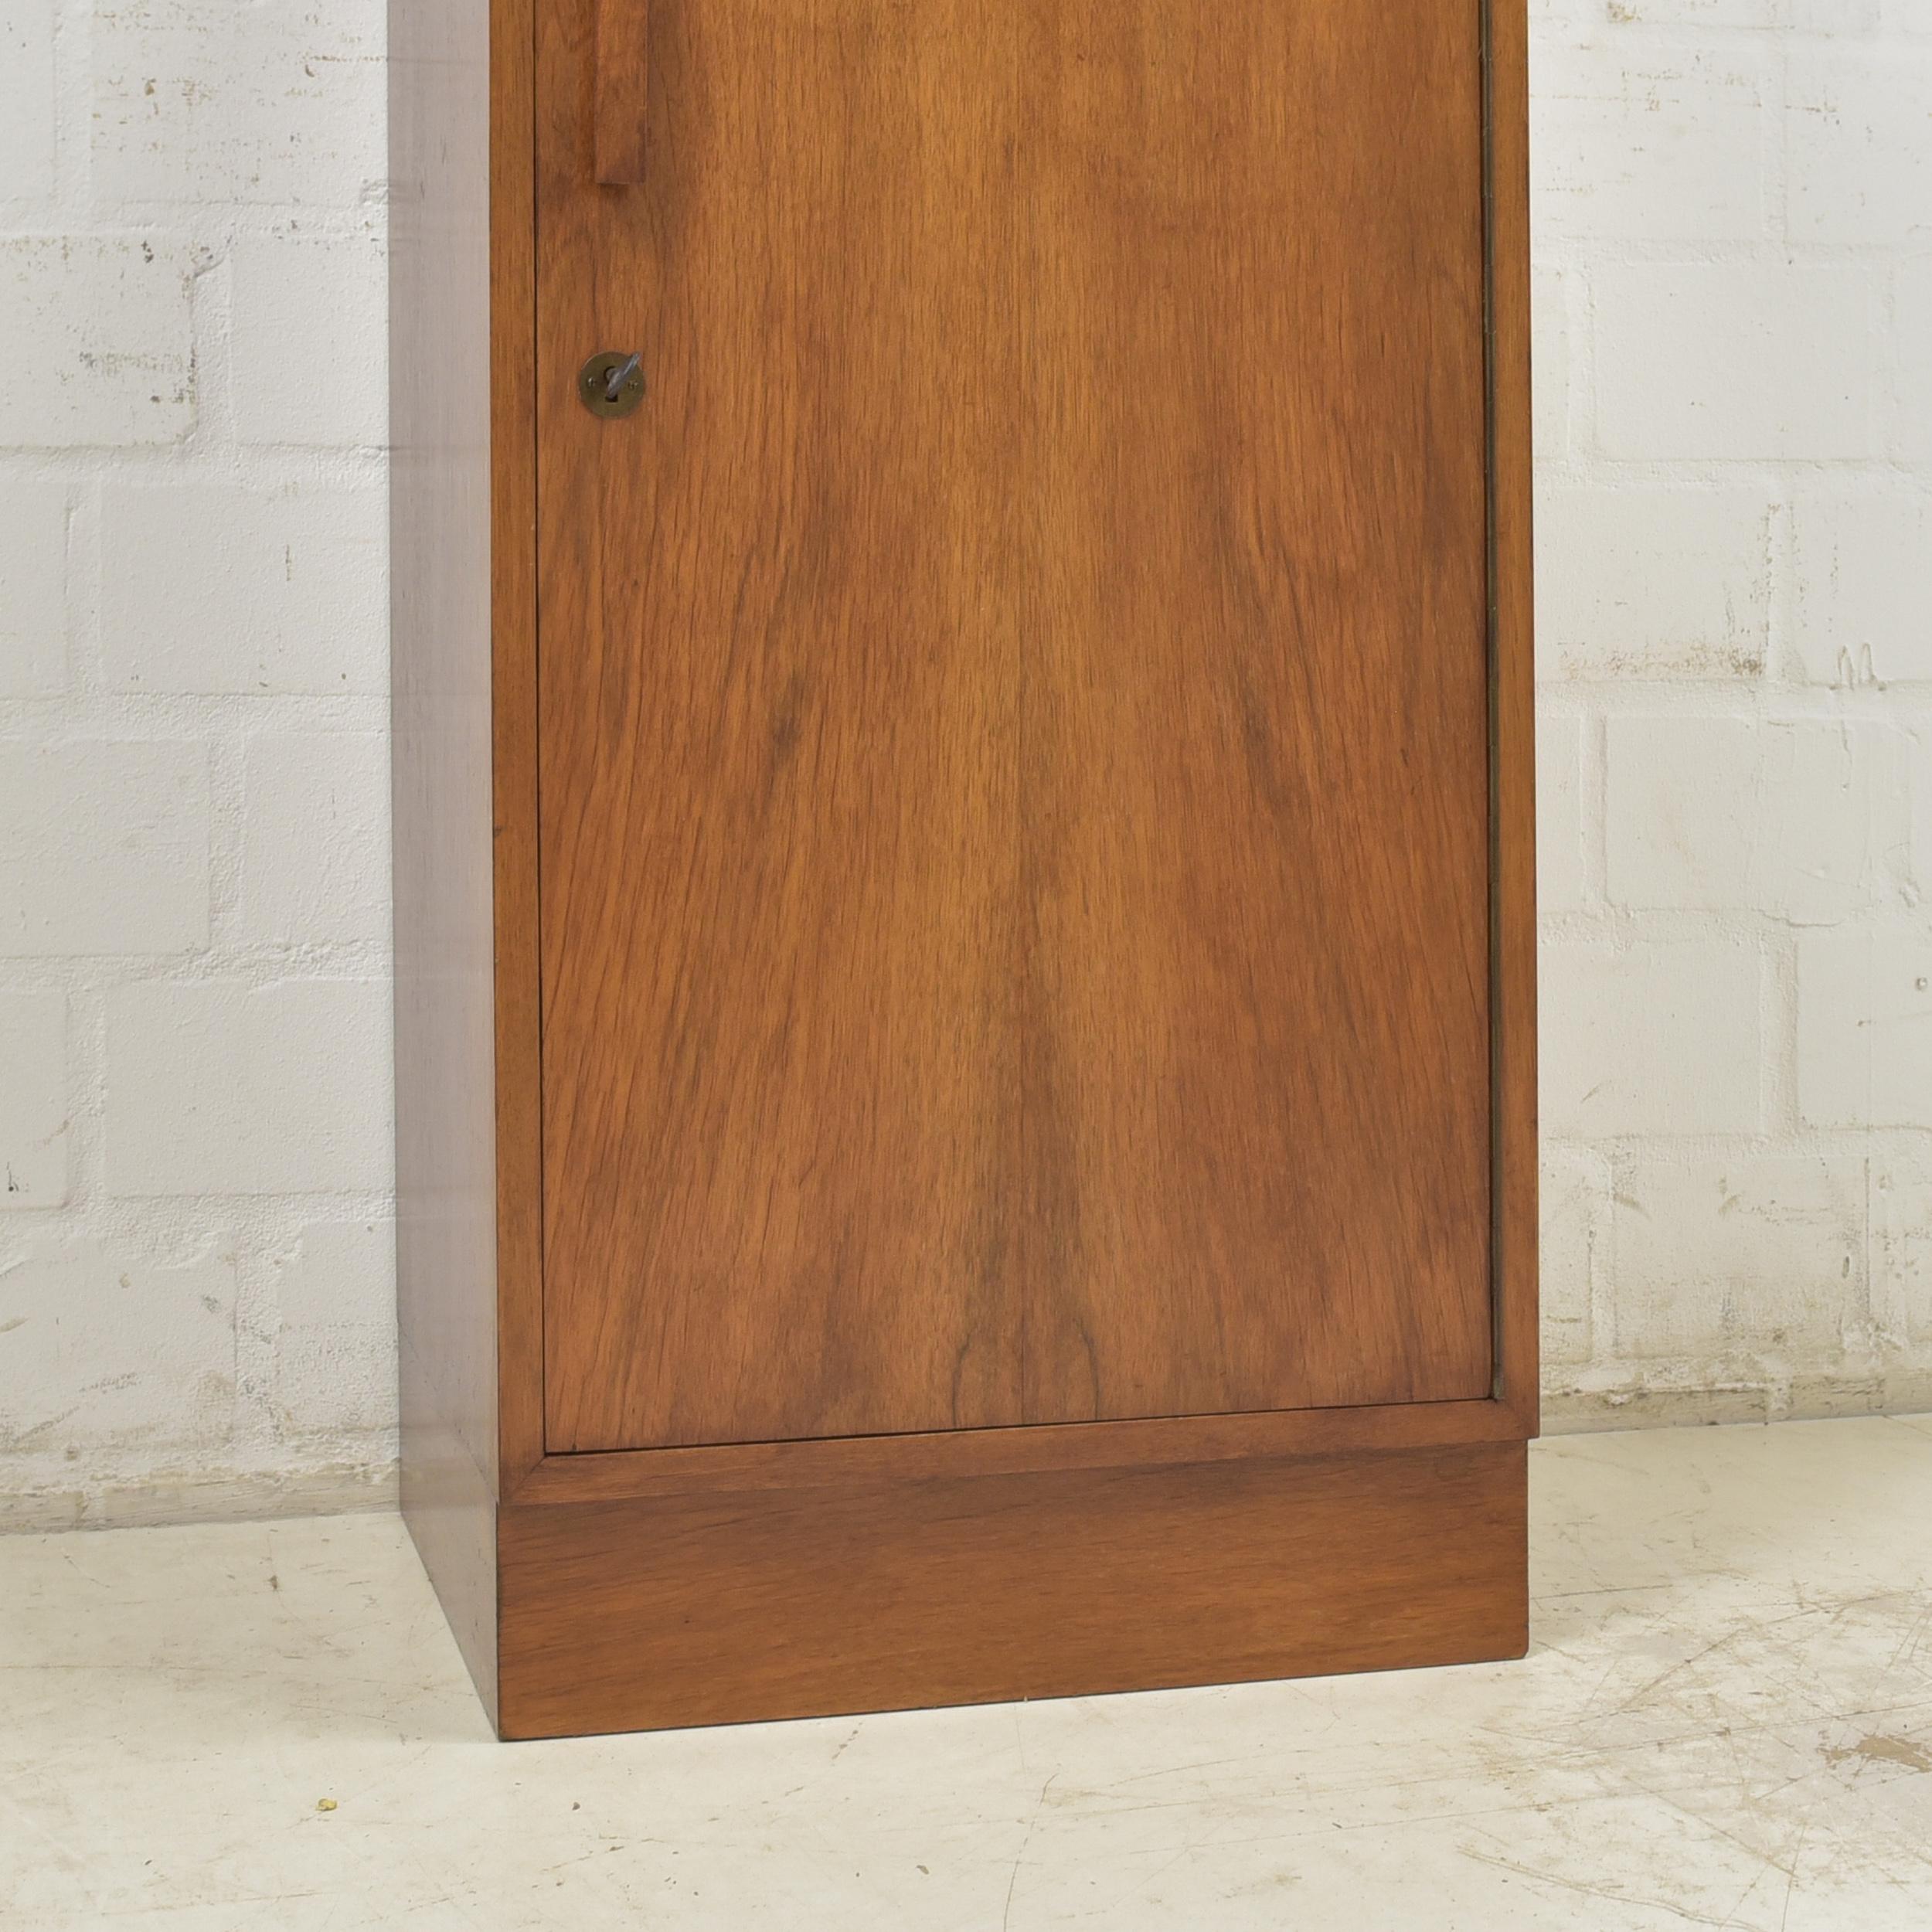 Retro Midcentury Art Deco Narrow Chest of Drawers / Small Cabinet, 1950 For Sale 4